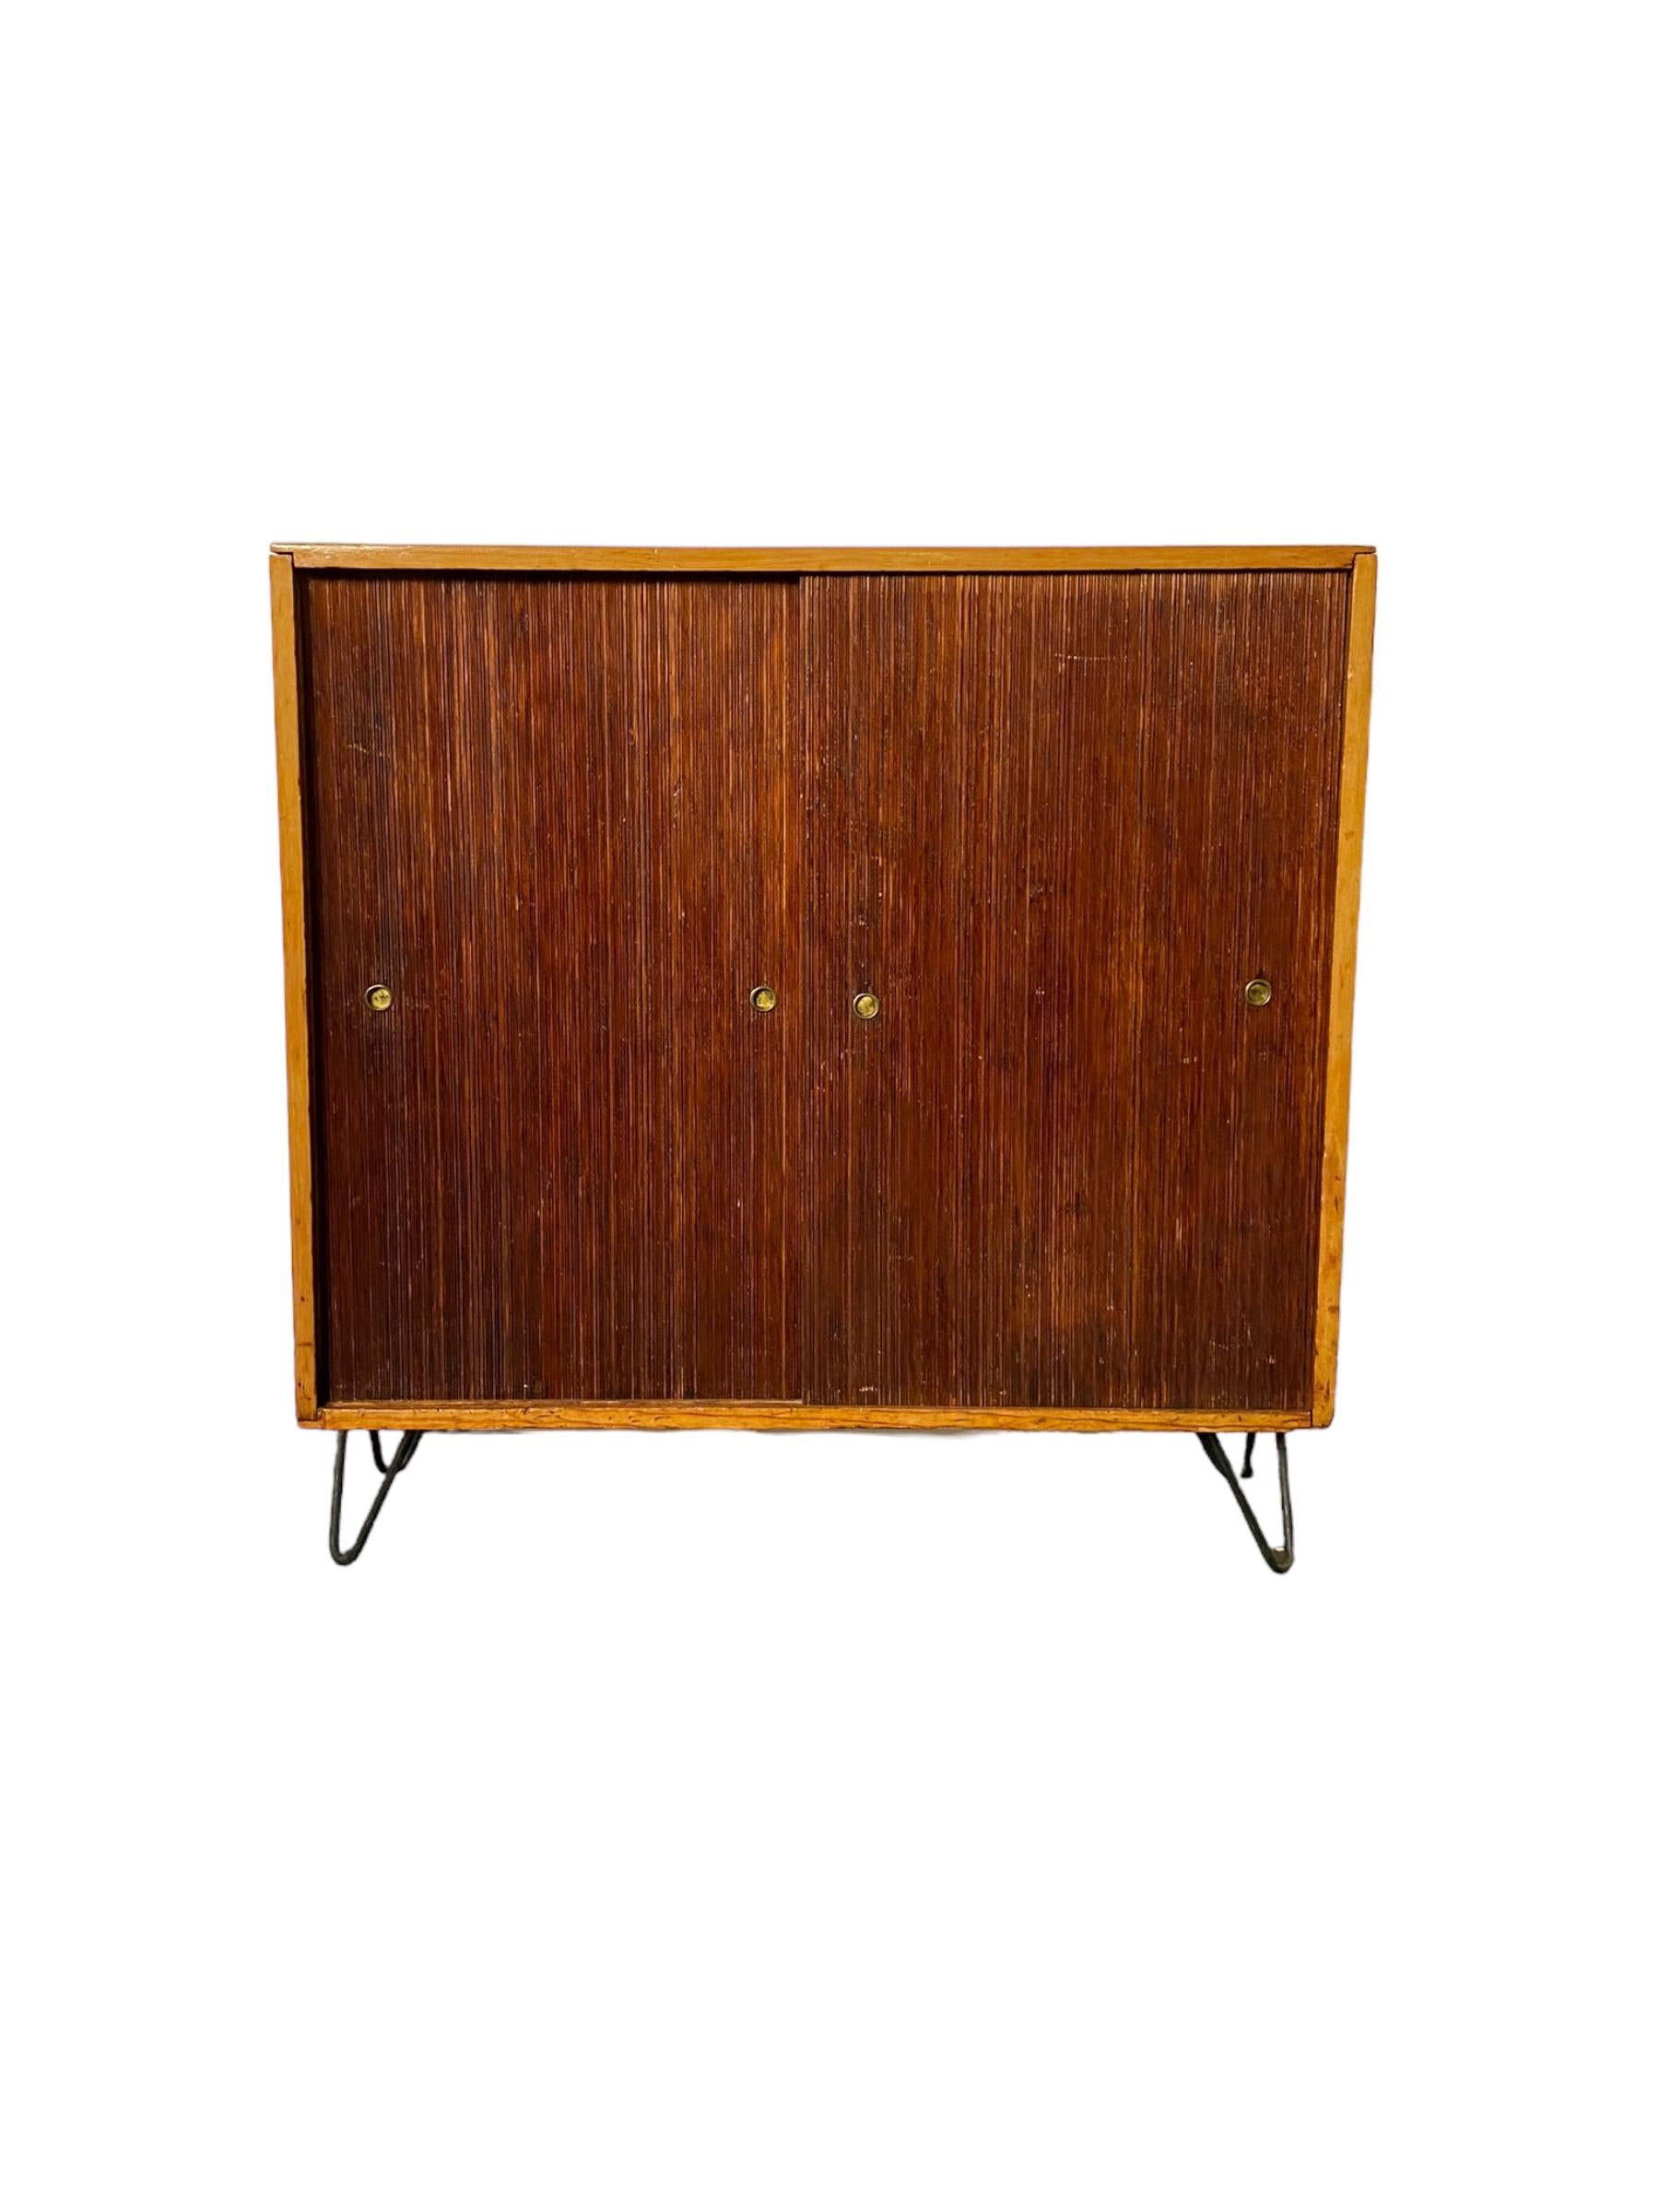 Sliding door two door cabinet from the late 1950s with two shelves. Tamboor doors in good vintage condition. Doors slide with ease. Cast iron hairpin legs. Two tone wood frame and doors. Great as a sideboard for easy and handsome storage. Small